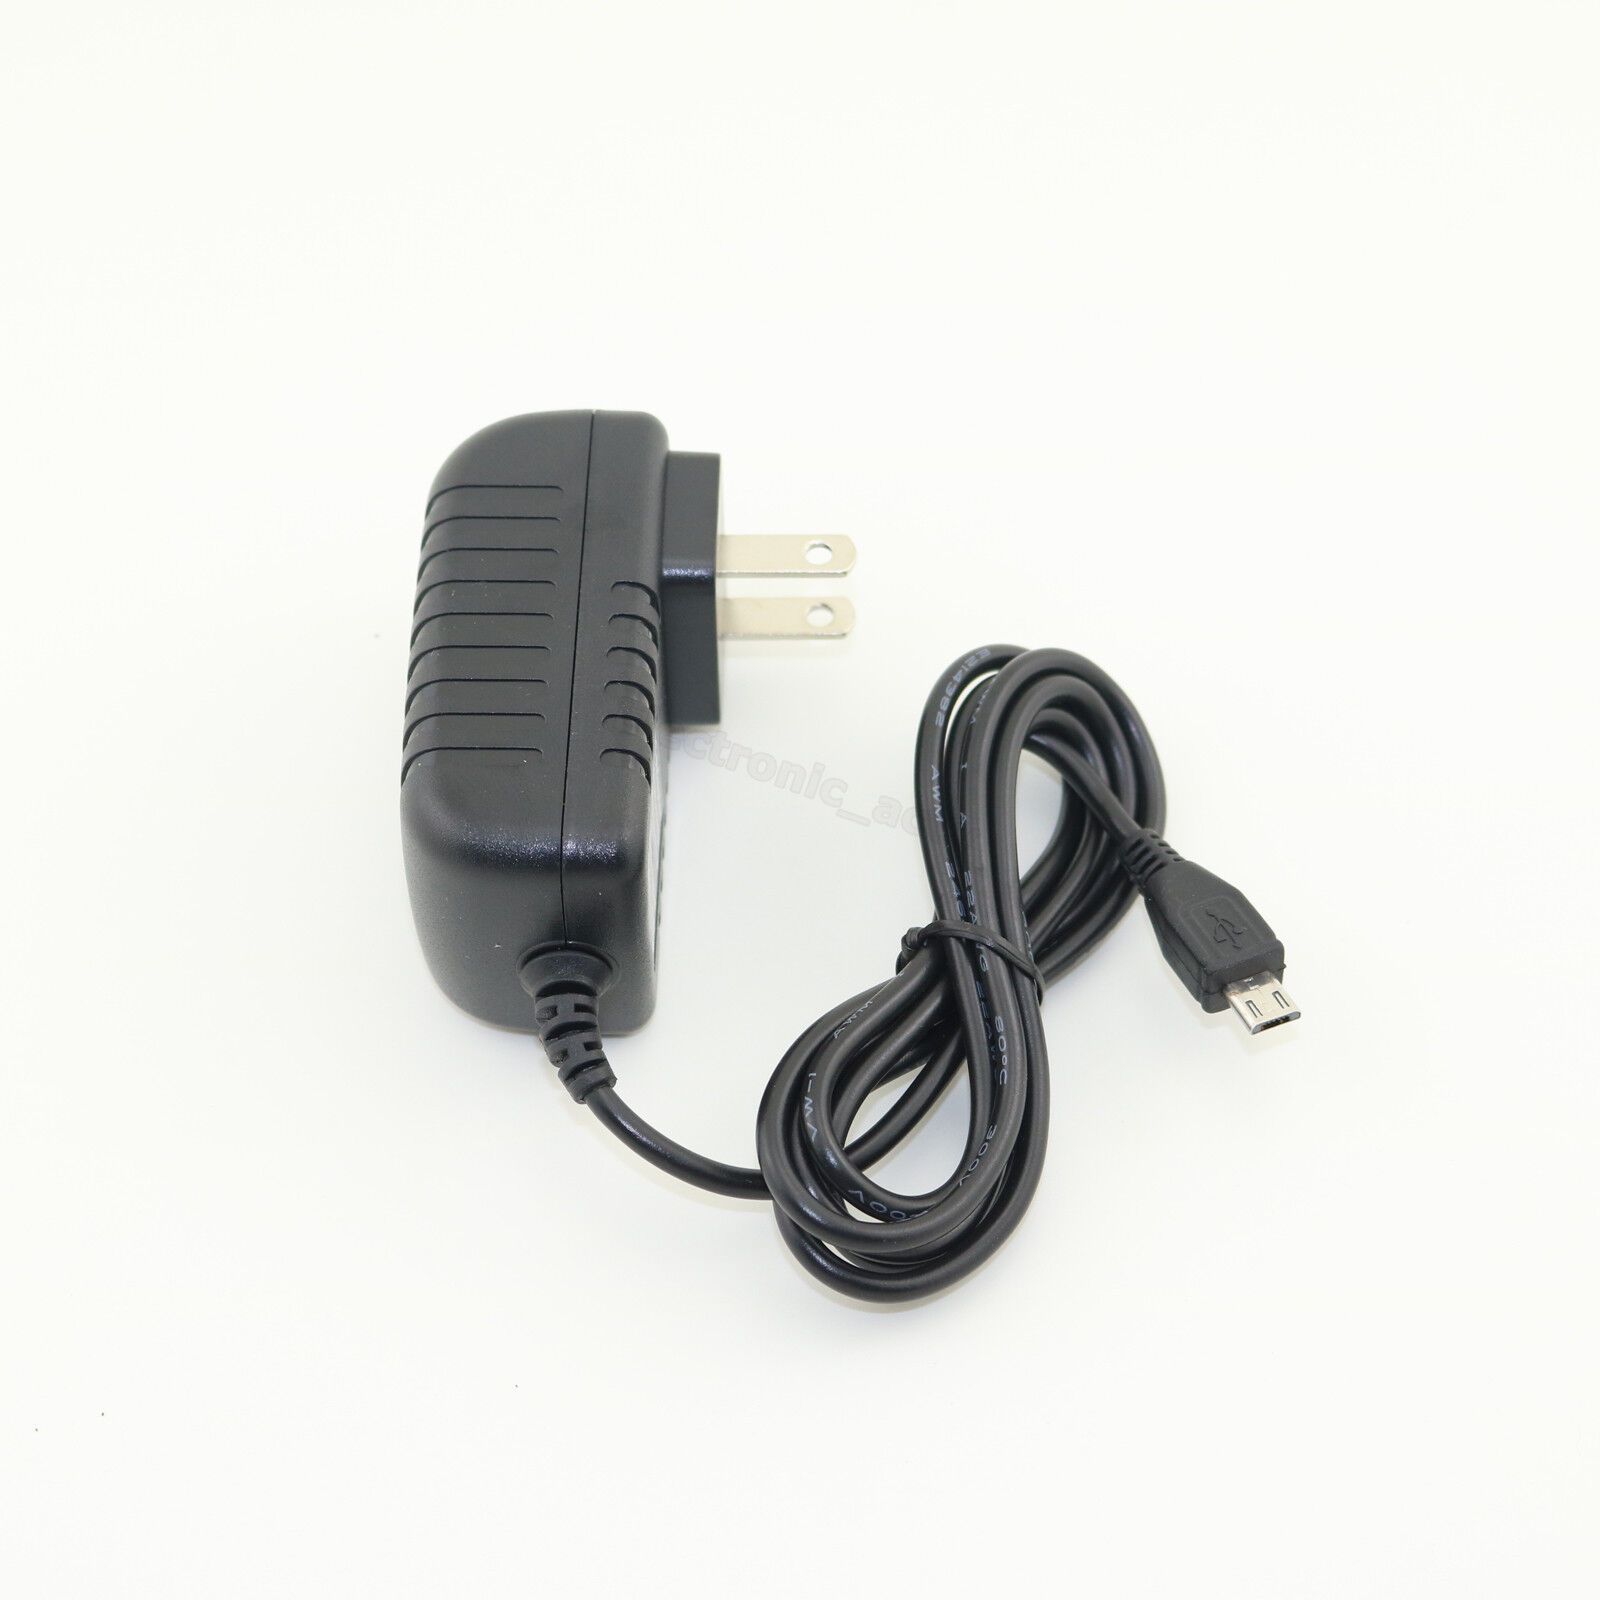 Replacement AC-DC Adaptor Charger for Morphy Richards Supervac Sleek 731006 Vac Model PHILIPS Colour Black Compatible B